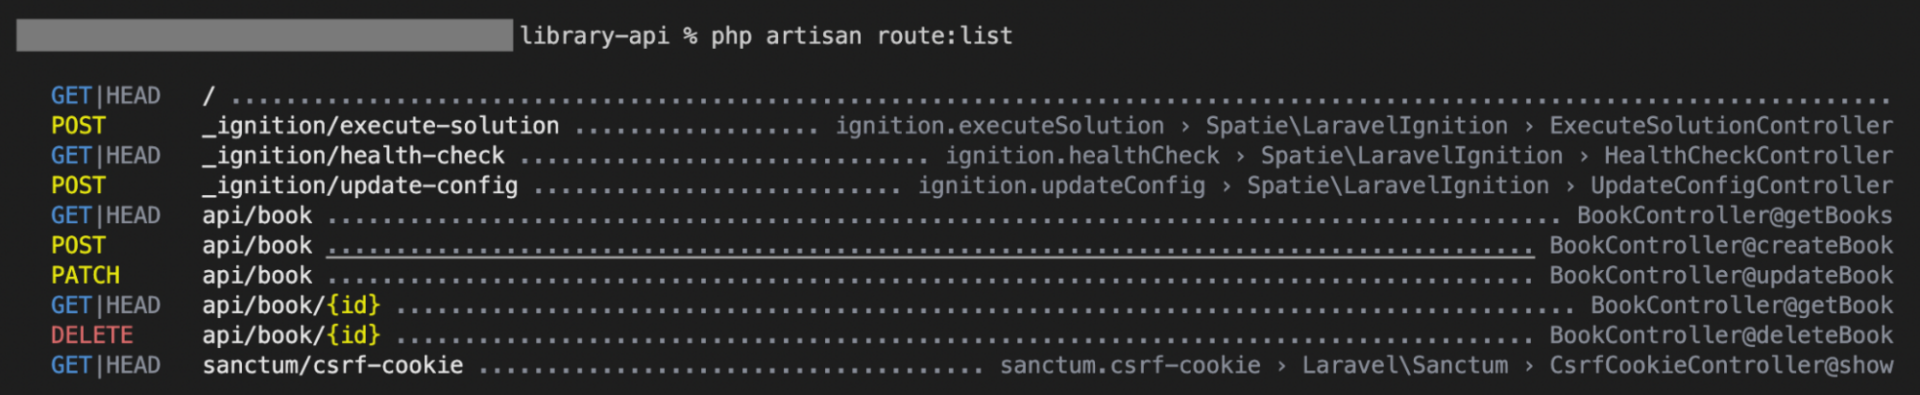 The terminal displays the "php artisan route: